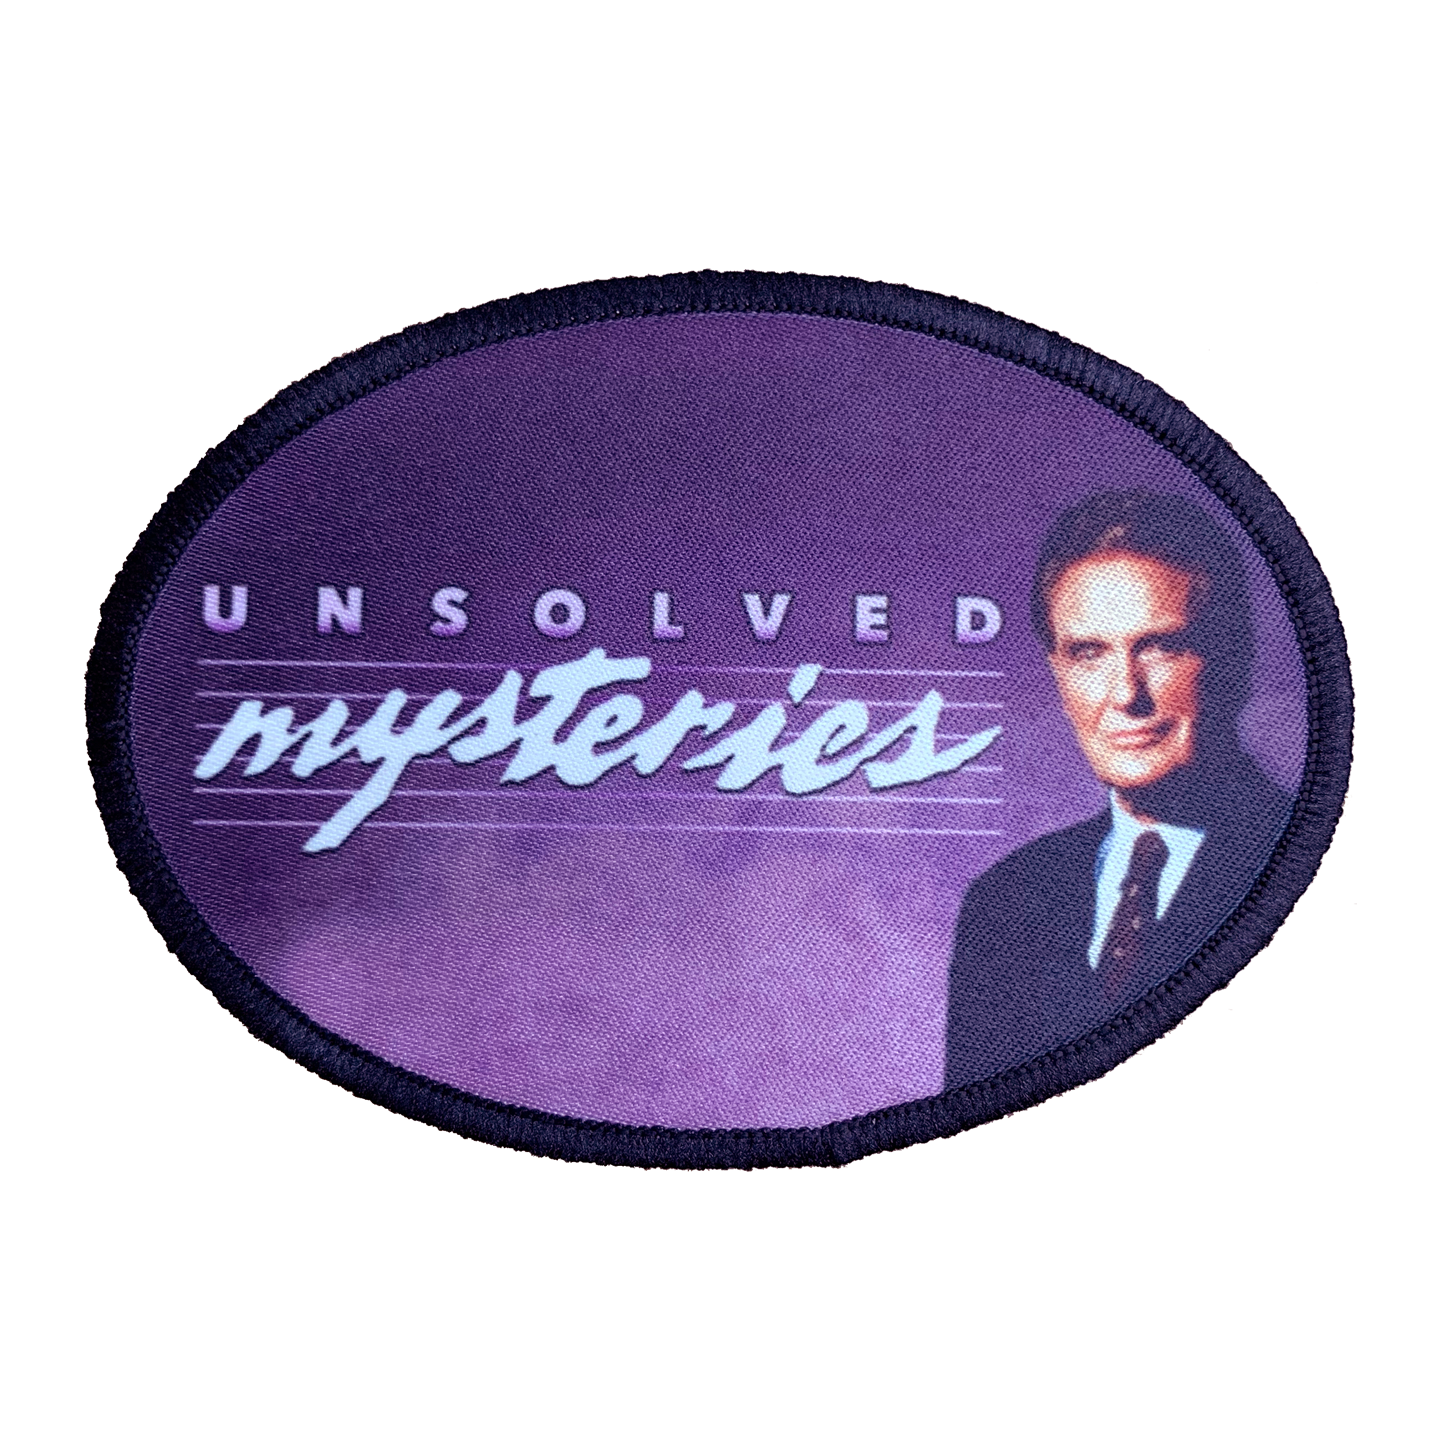 Unsolved Mysteries Iron-On Patch - UNMASKED Horror & Punk Patches and Decor